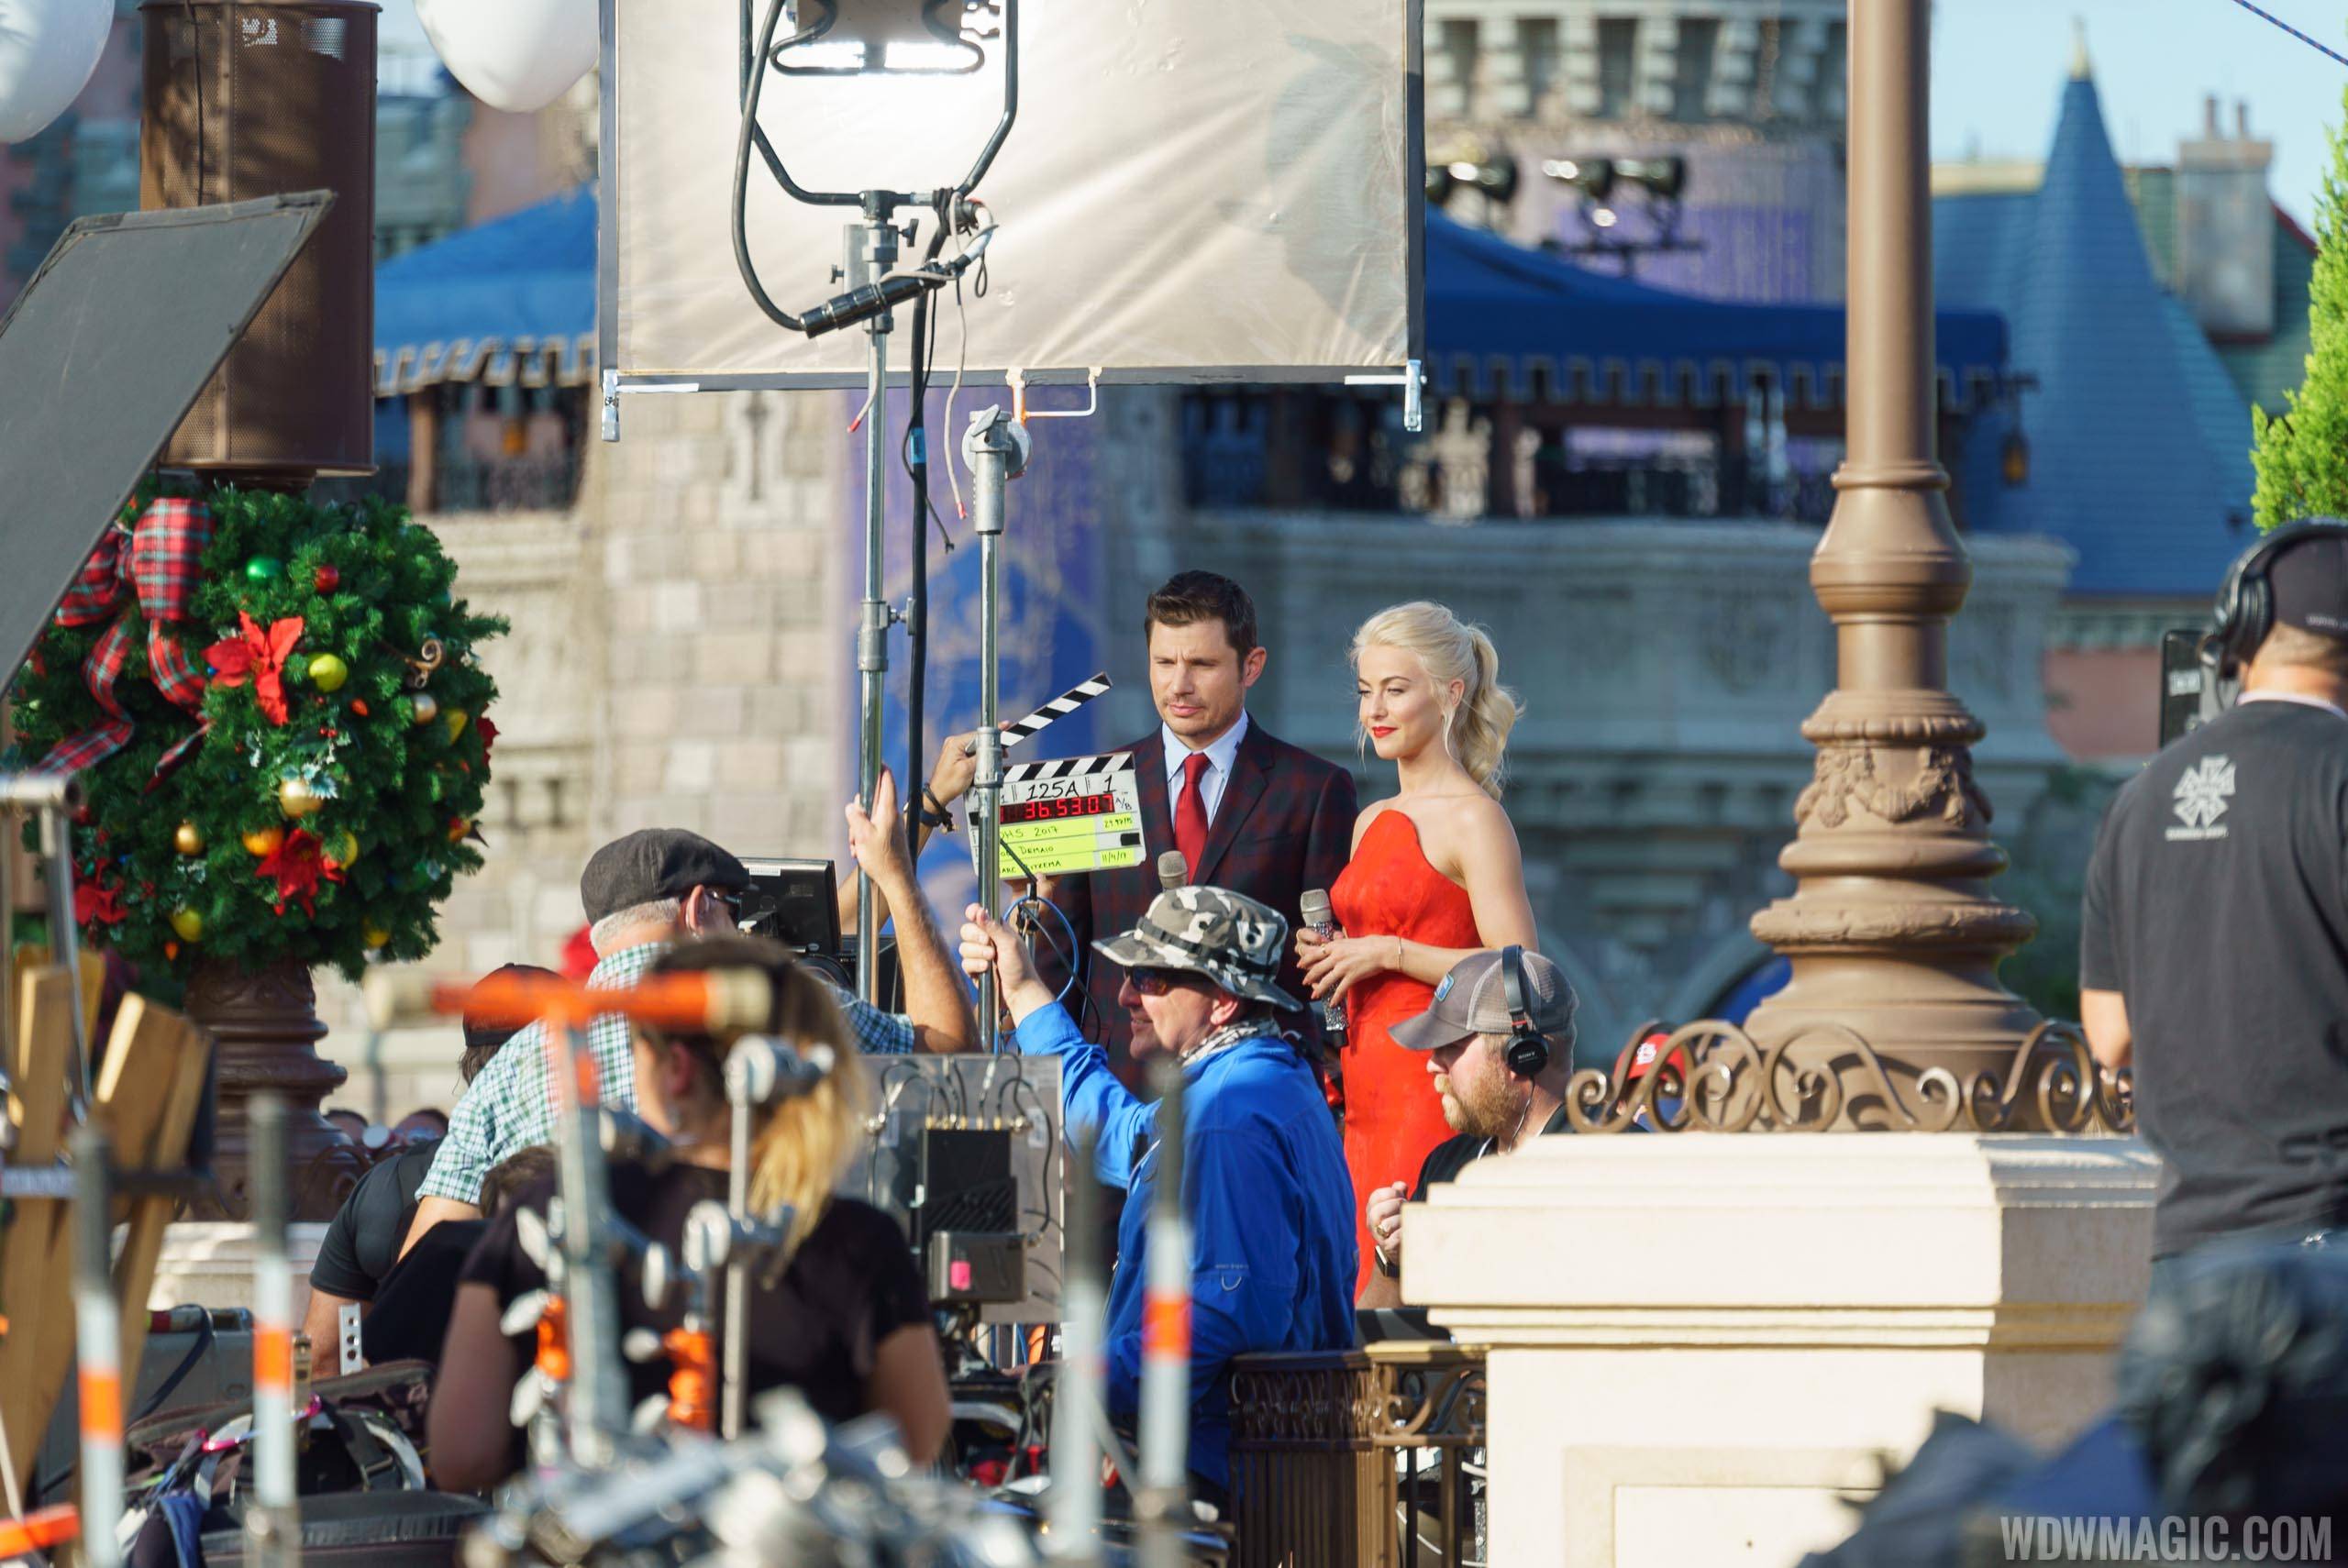 Shooting the ABC TV specials at the Magic Kingdom with Julianne Hough and Nick Lachey